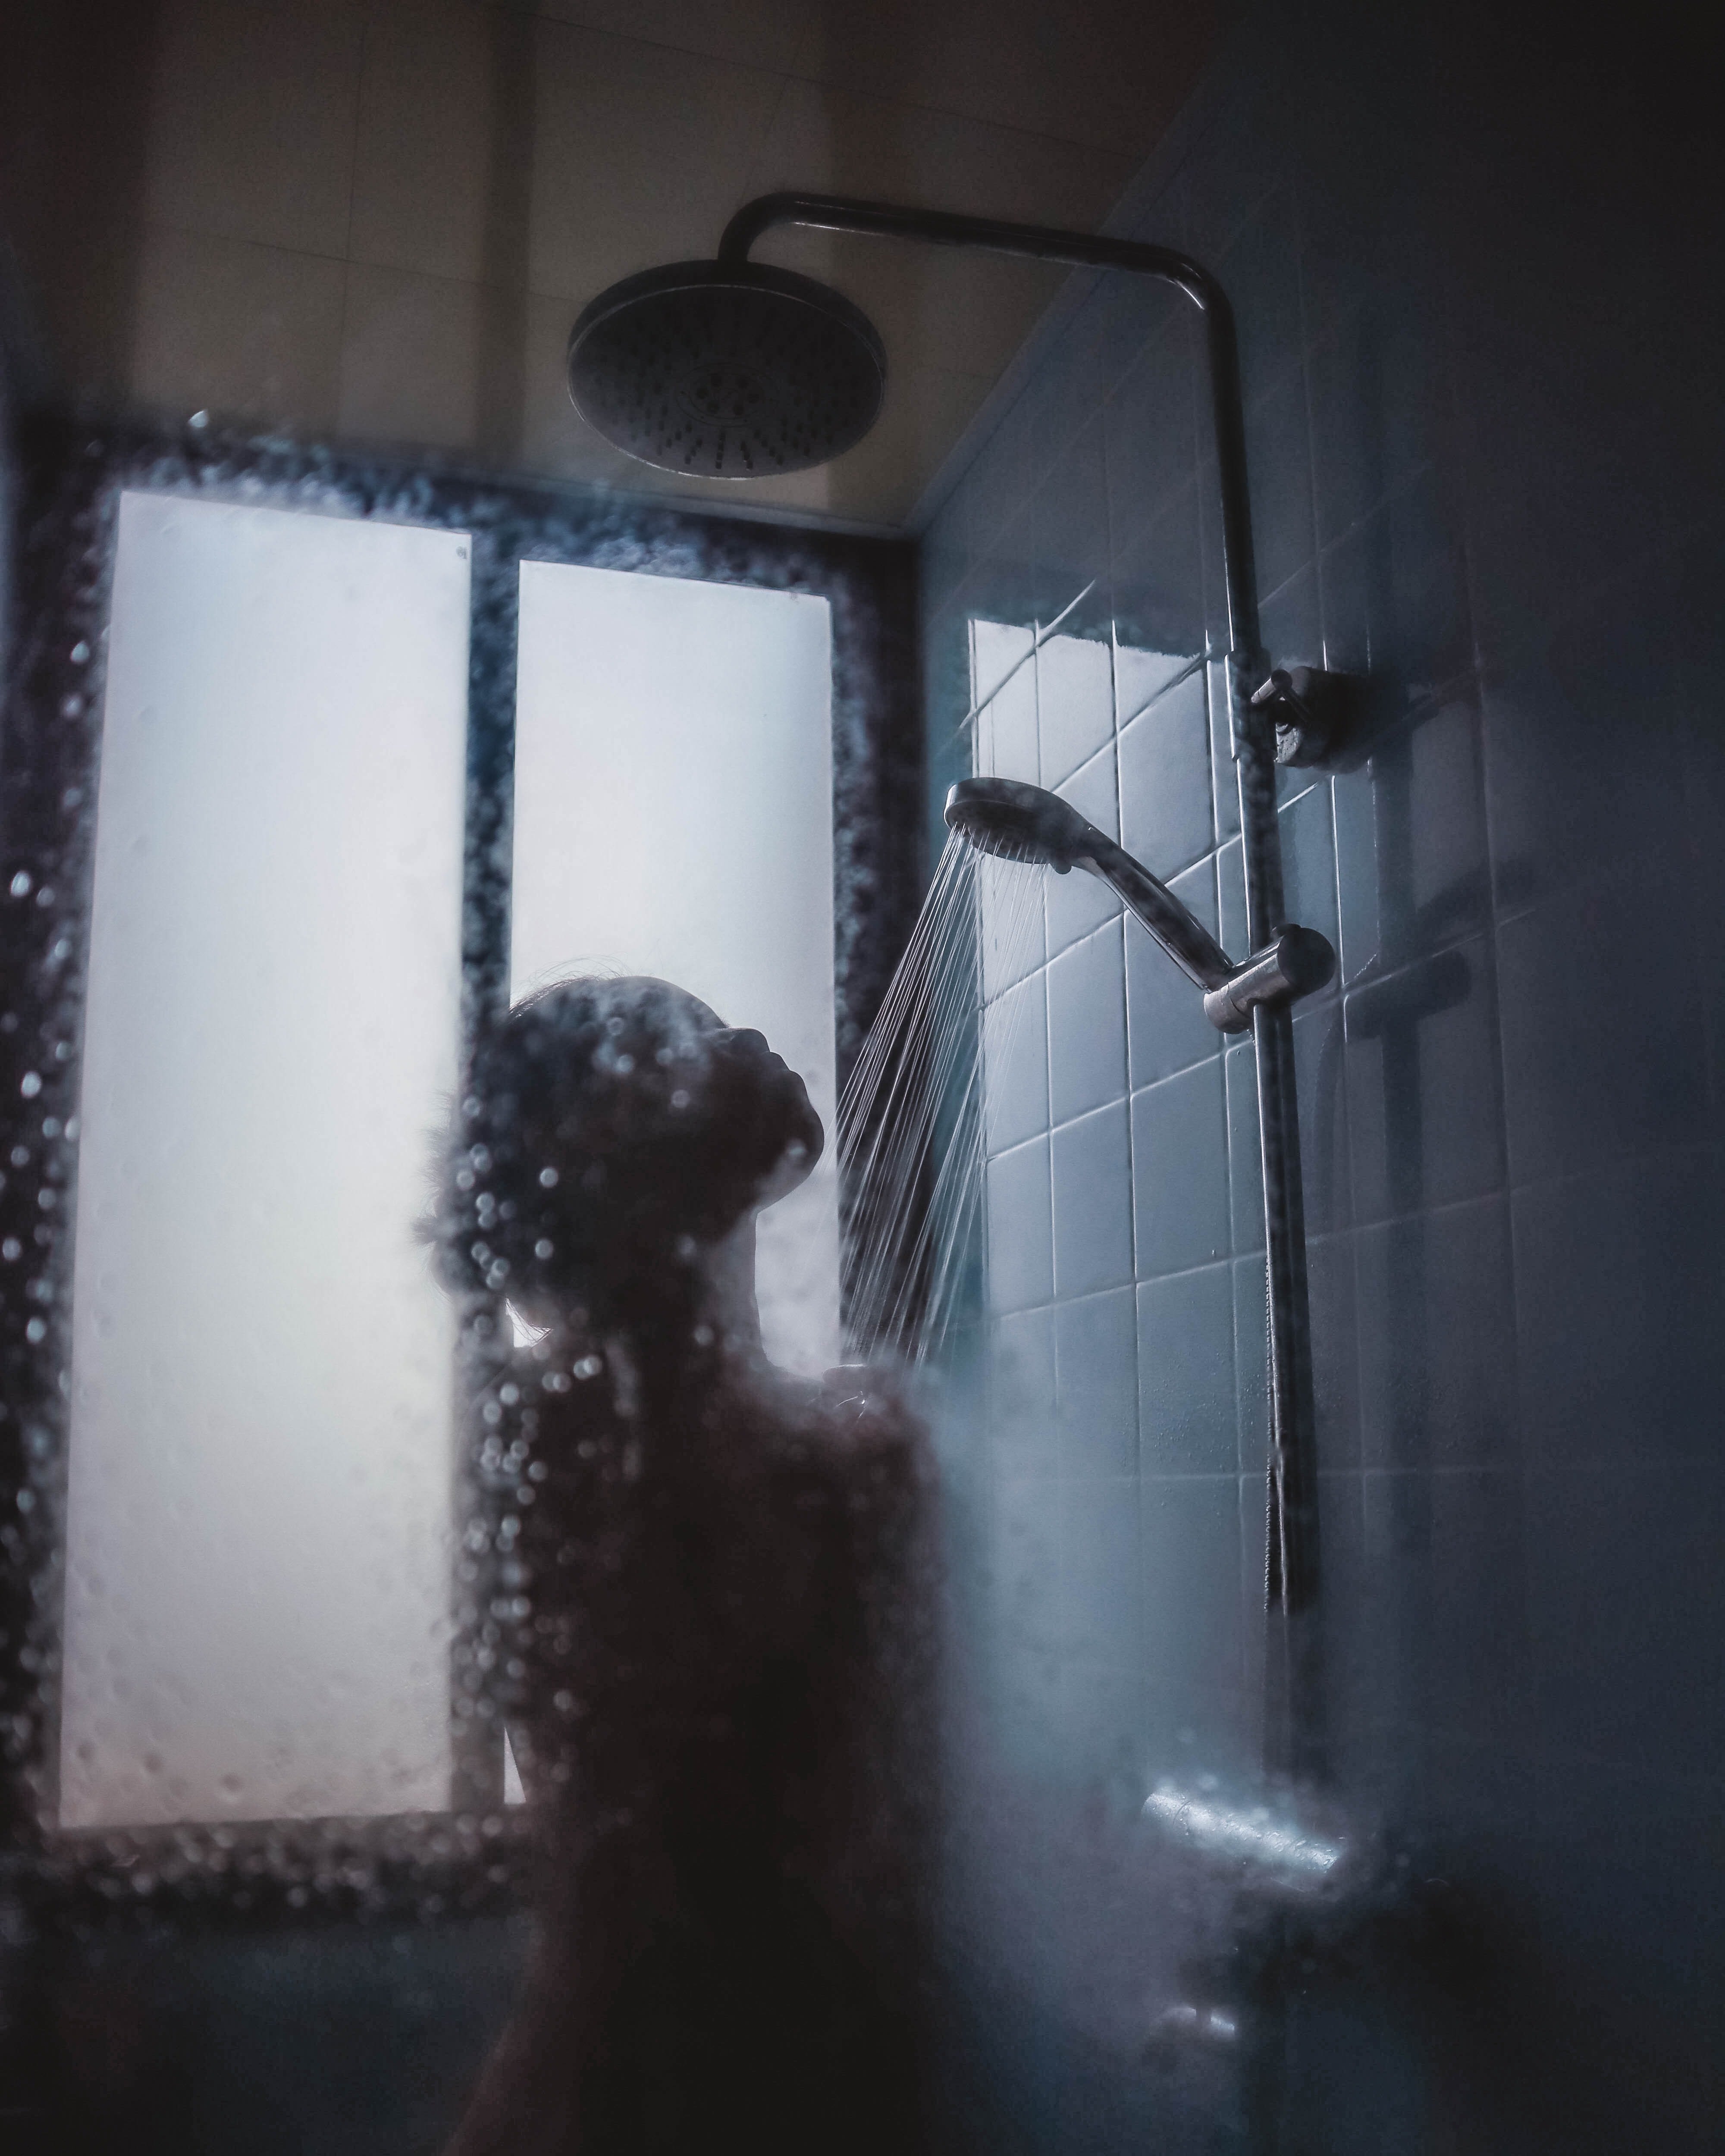 Marie realized someone was using the shower in her absence. | Source: Unsplash